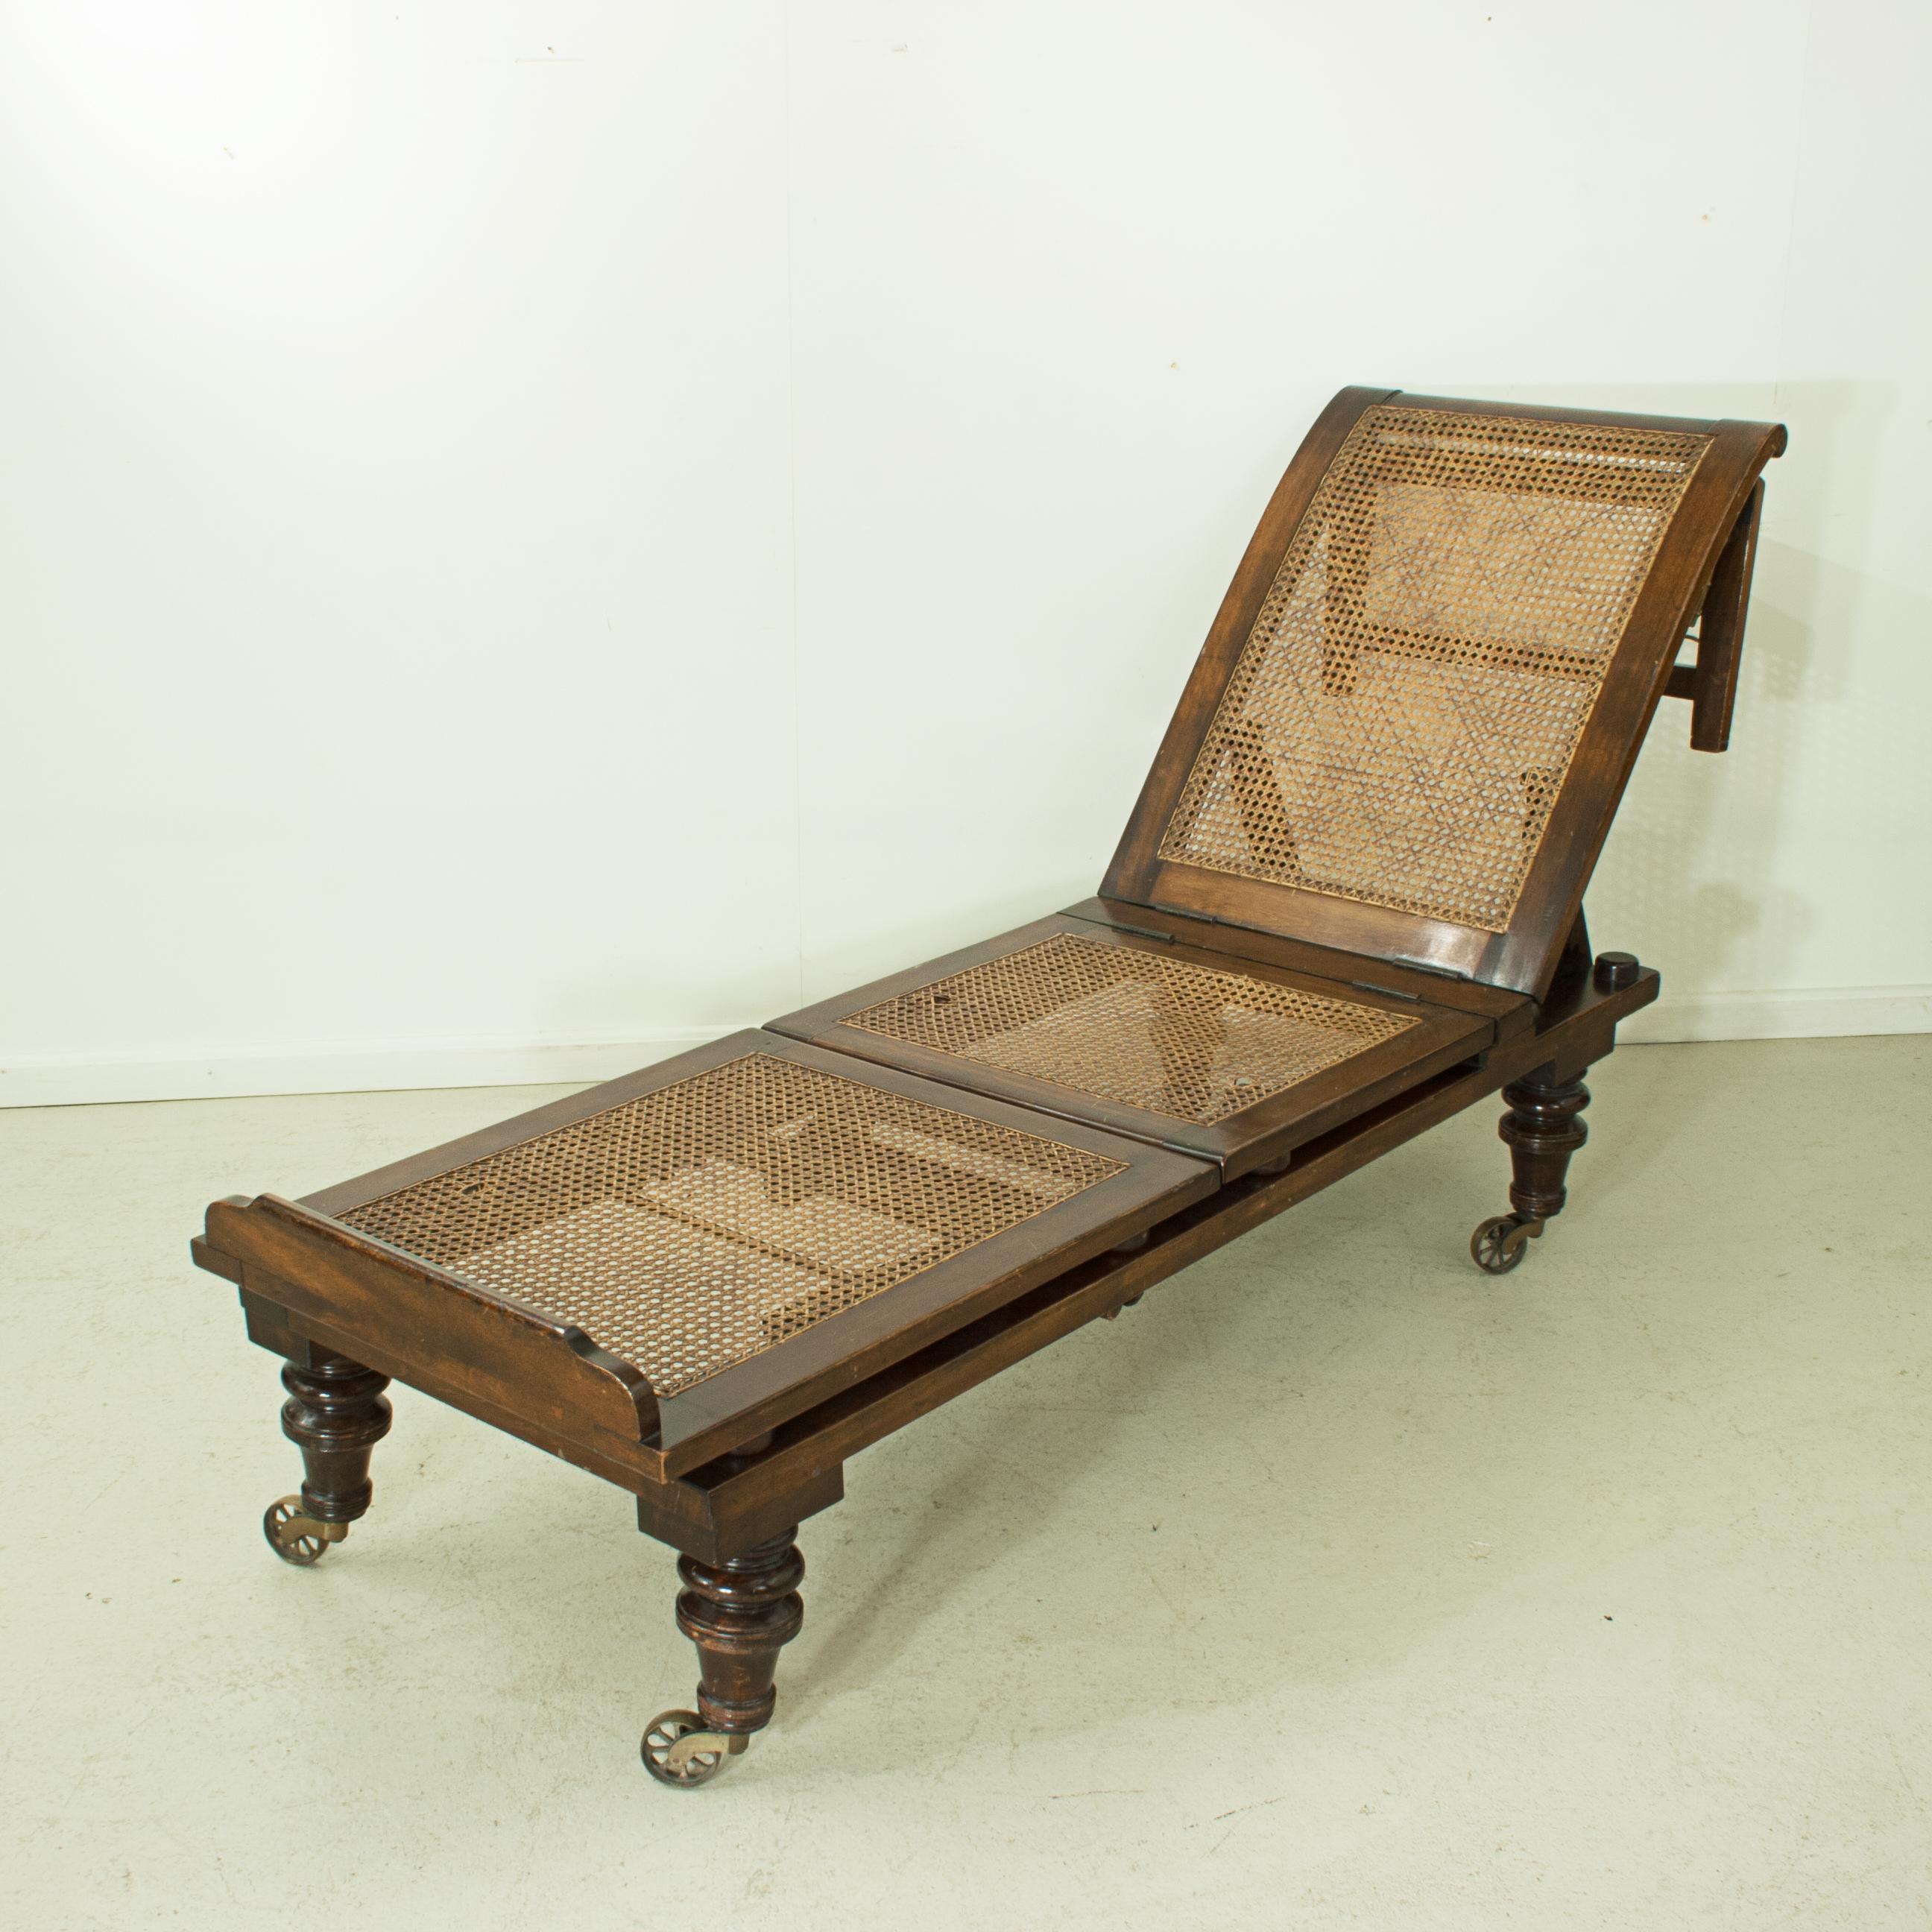 Late Victorian Carter's Patent reclining day bed.
A fully adjustable Alfred Carter campaign or day bed with three cane rattan sections. The three sections can be adjusted into many different positions to suit the comfort of the user, it can also be